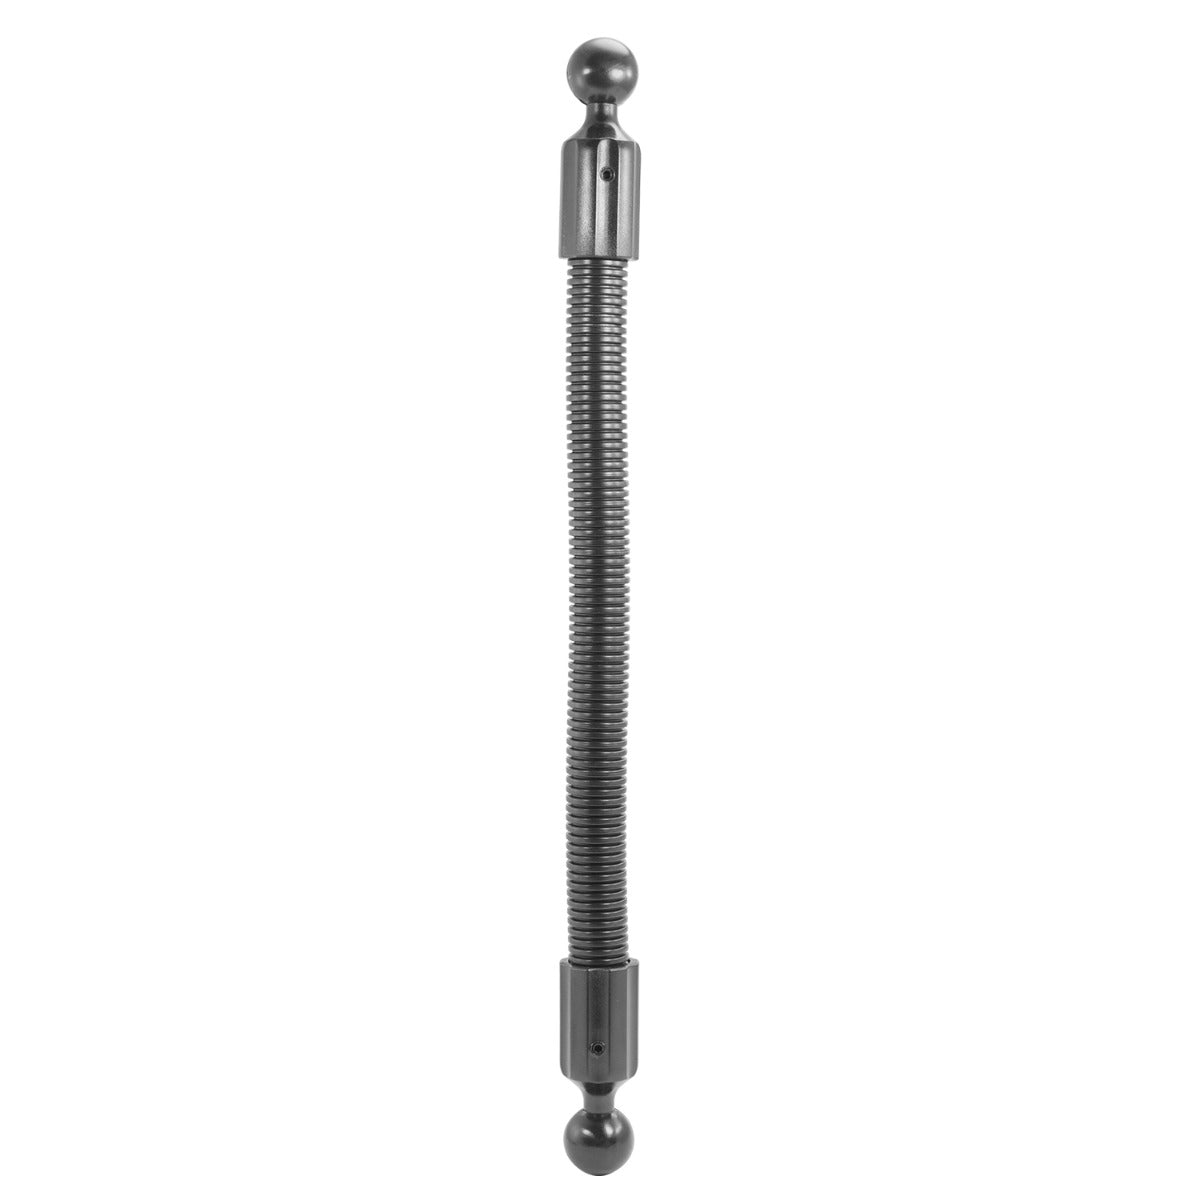 iBOLT™ (15 inch) 25mm / 1 inch to 25mm / 1 inch Flexible Extension Ball Adapter